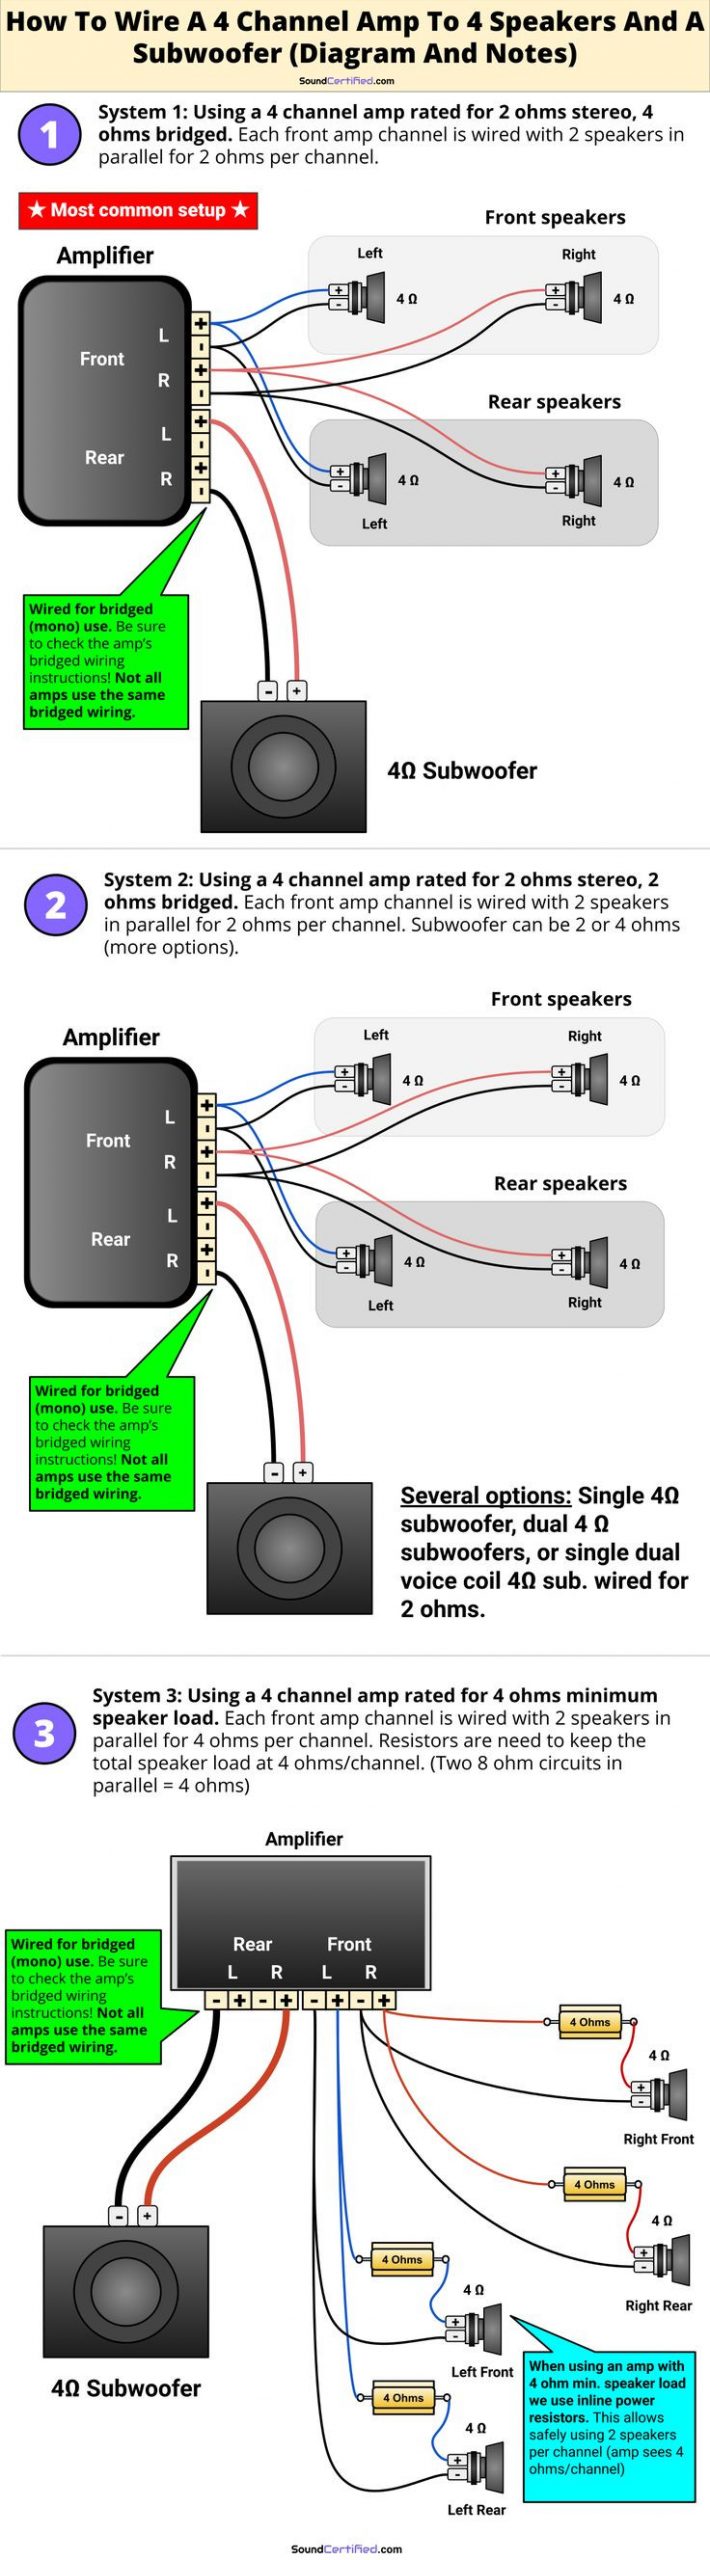 5 Channel Amplifier Wiring Diagram How to Wire A 4 Channel Amp to 4 Speakers and A Sub Car … Of 5 Channel Amplifier Wiring Diagram